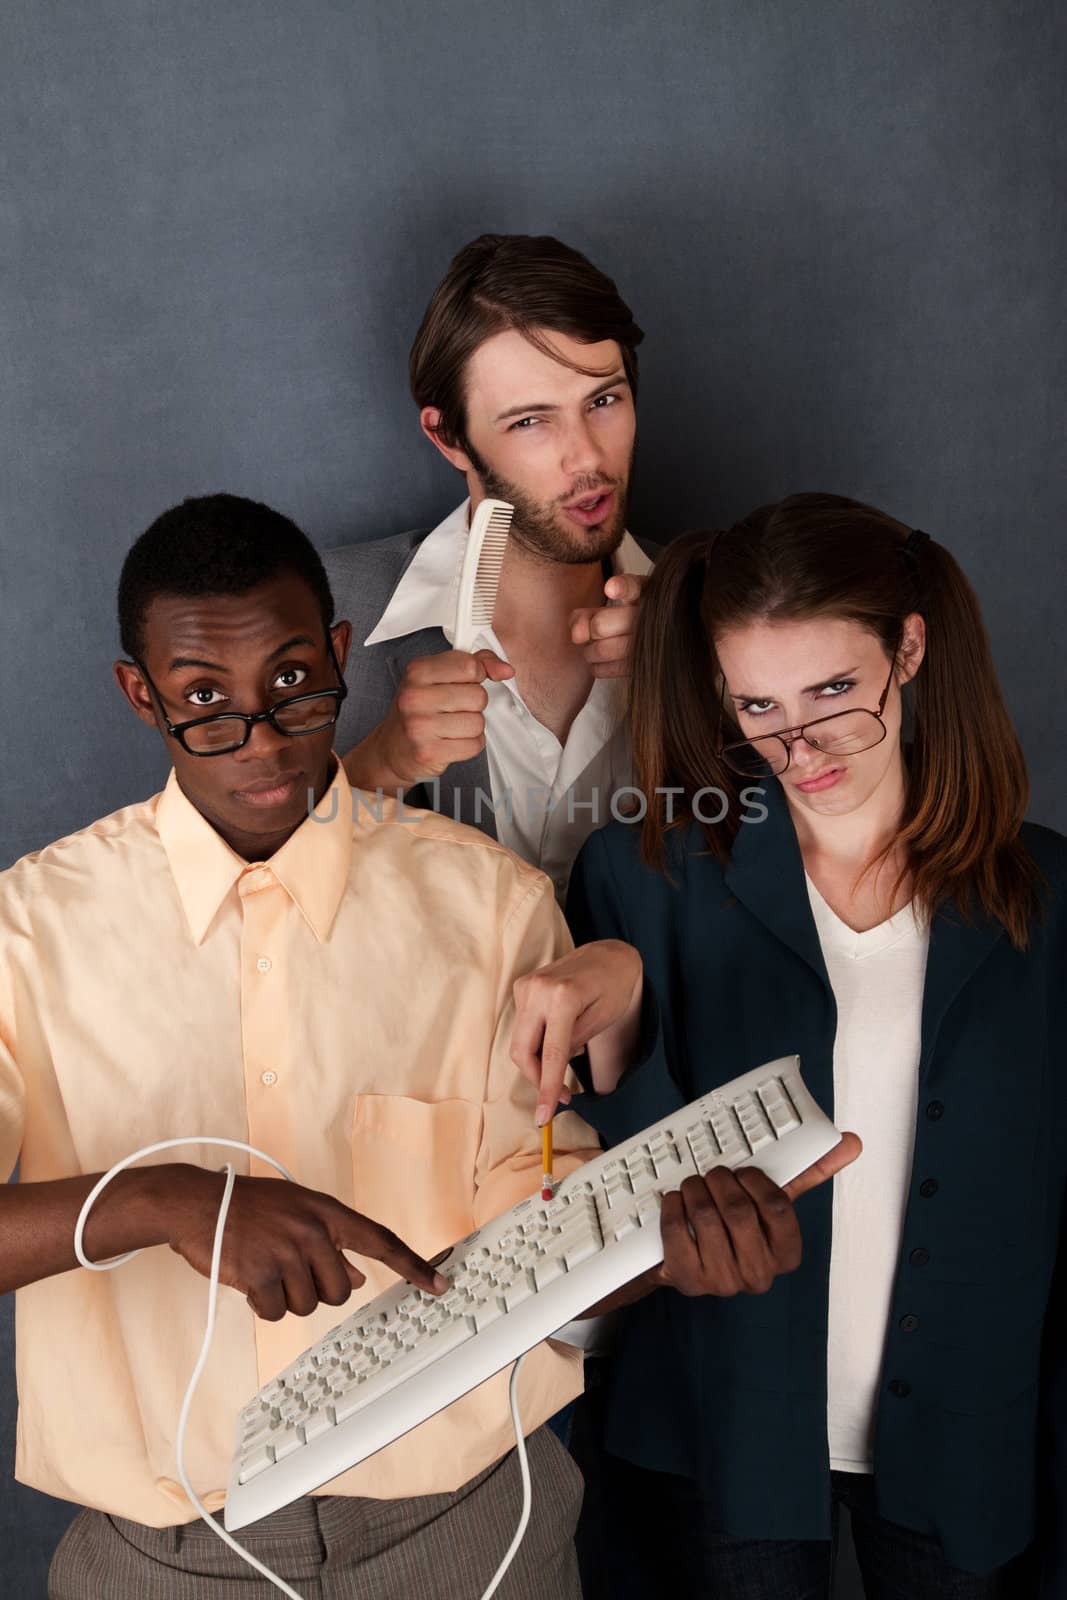 Three nerds with large collar, keyboard and thick eyeglasses